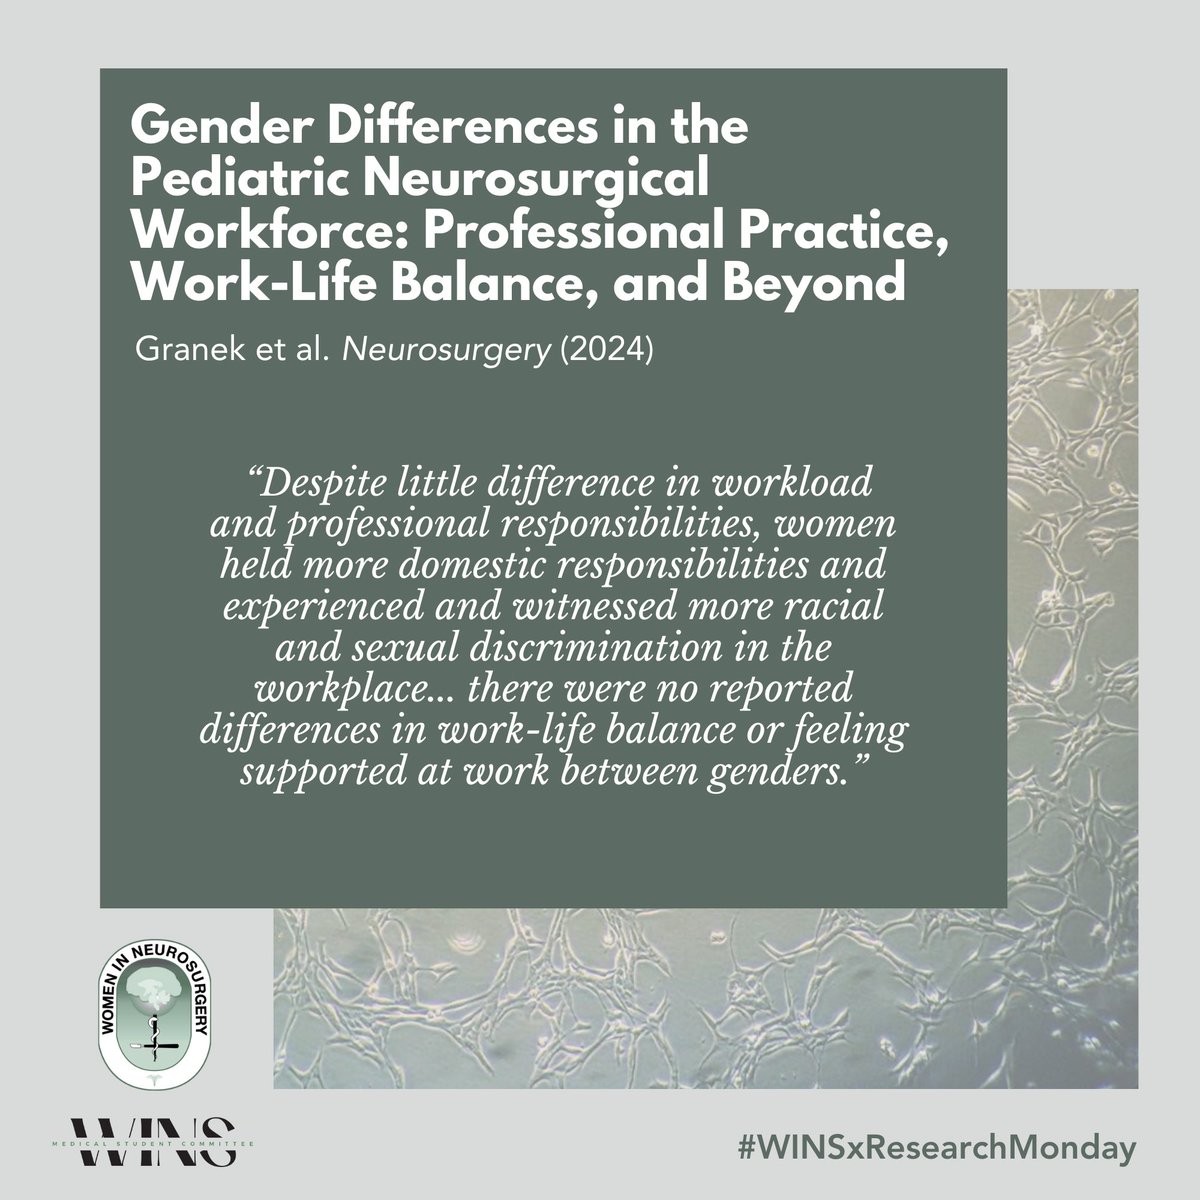 1/3 of the pediatric neurosurgical workforce is female. Granek et al. explore gender differences in professional activities, work-life balance, family dynamics, career satisfaction, & workplace discrimination & harassment #WINSxResearchMonday #WomenInNeurosurgery @PedsSection